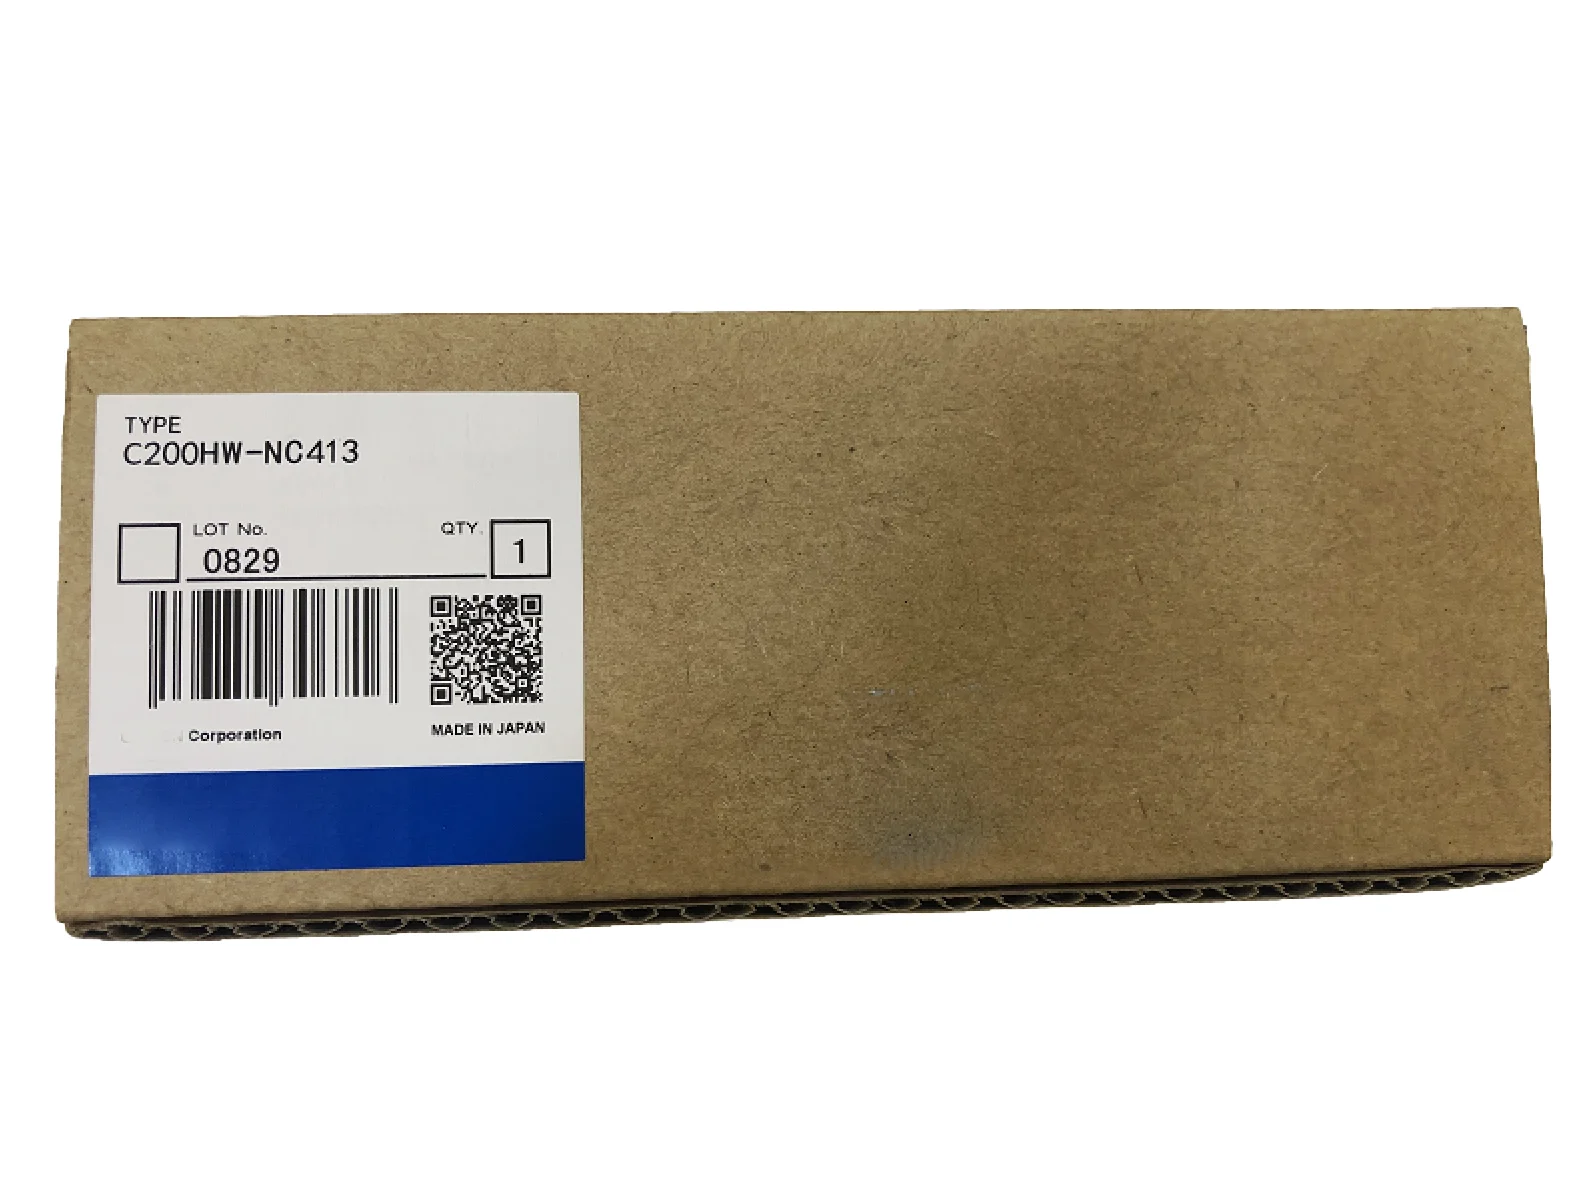 

New Original In BOX C200HW-NC413 {Warehouse stock} 1 Year Warranty Shipment within 24 hours